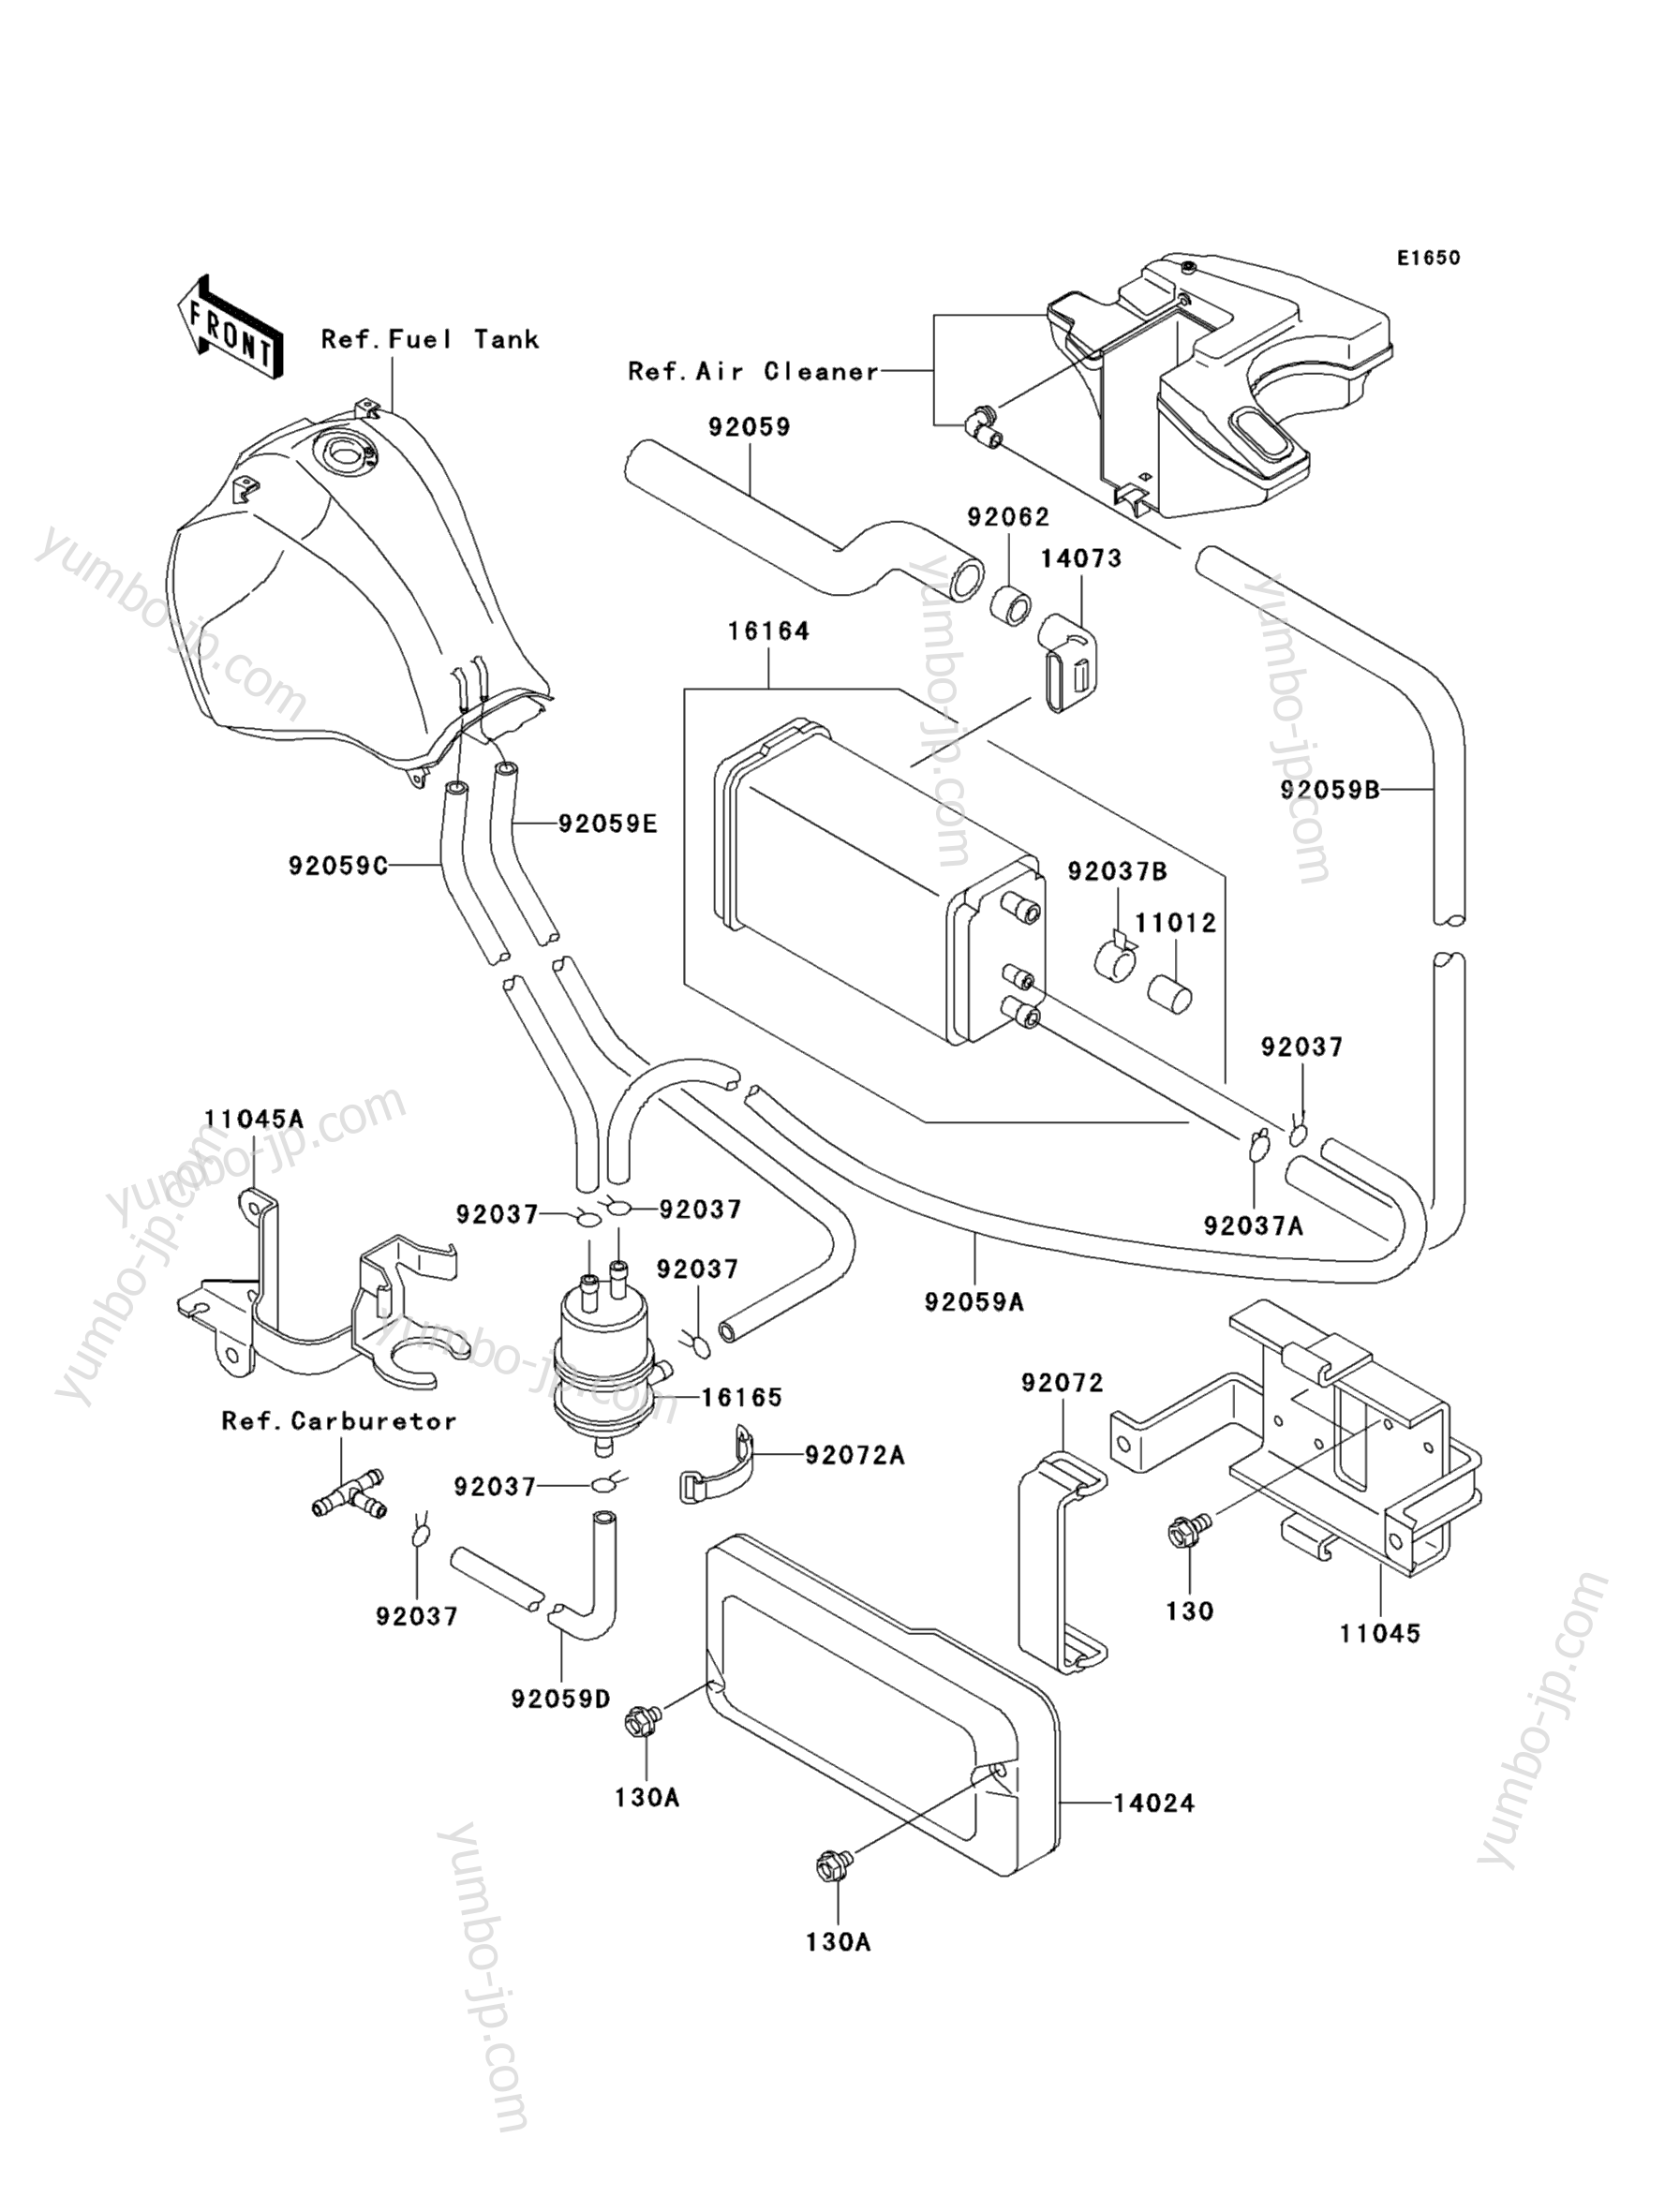 Fuel Evaporative System(CA) for motorcycles KAWASAKI KLR650 (KL650A7F) 2007 year